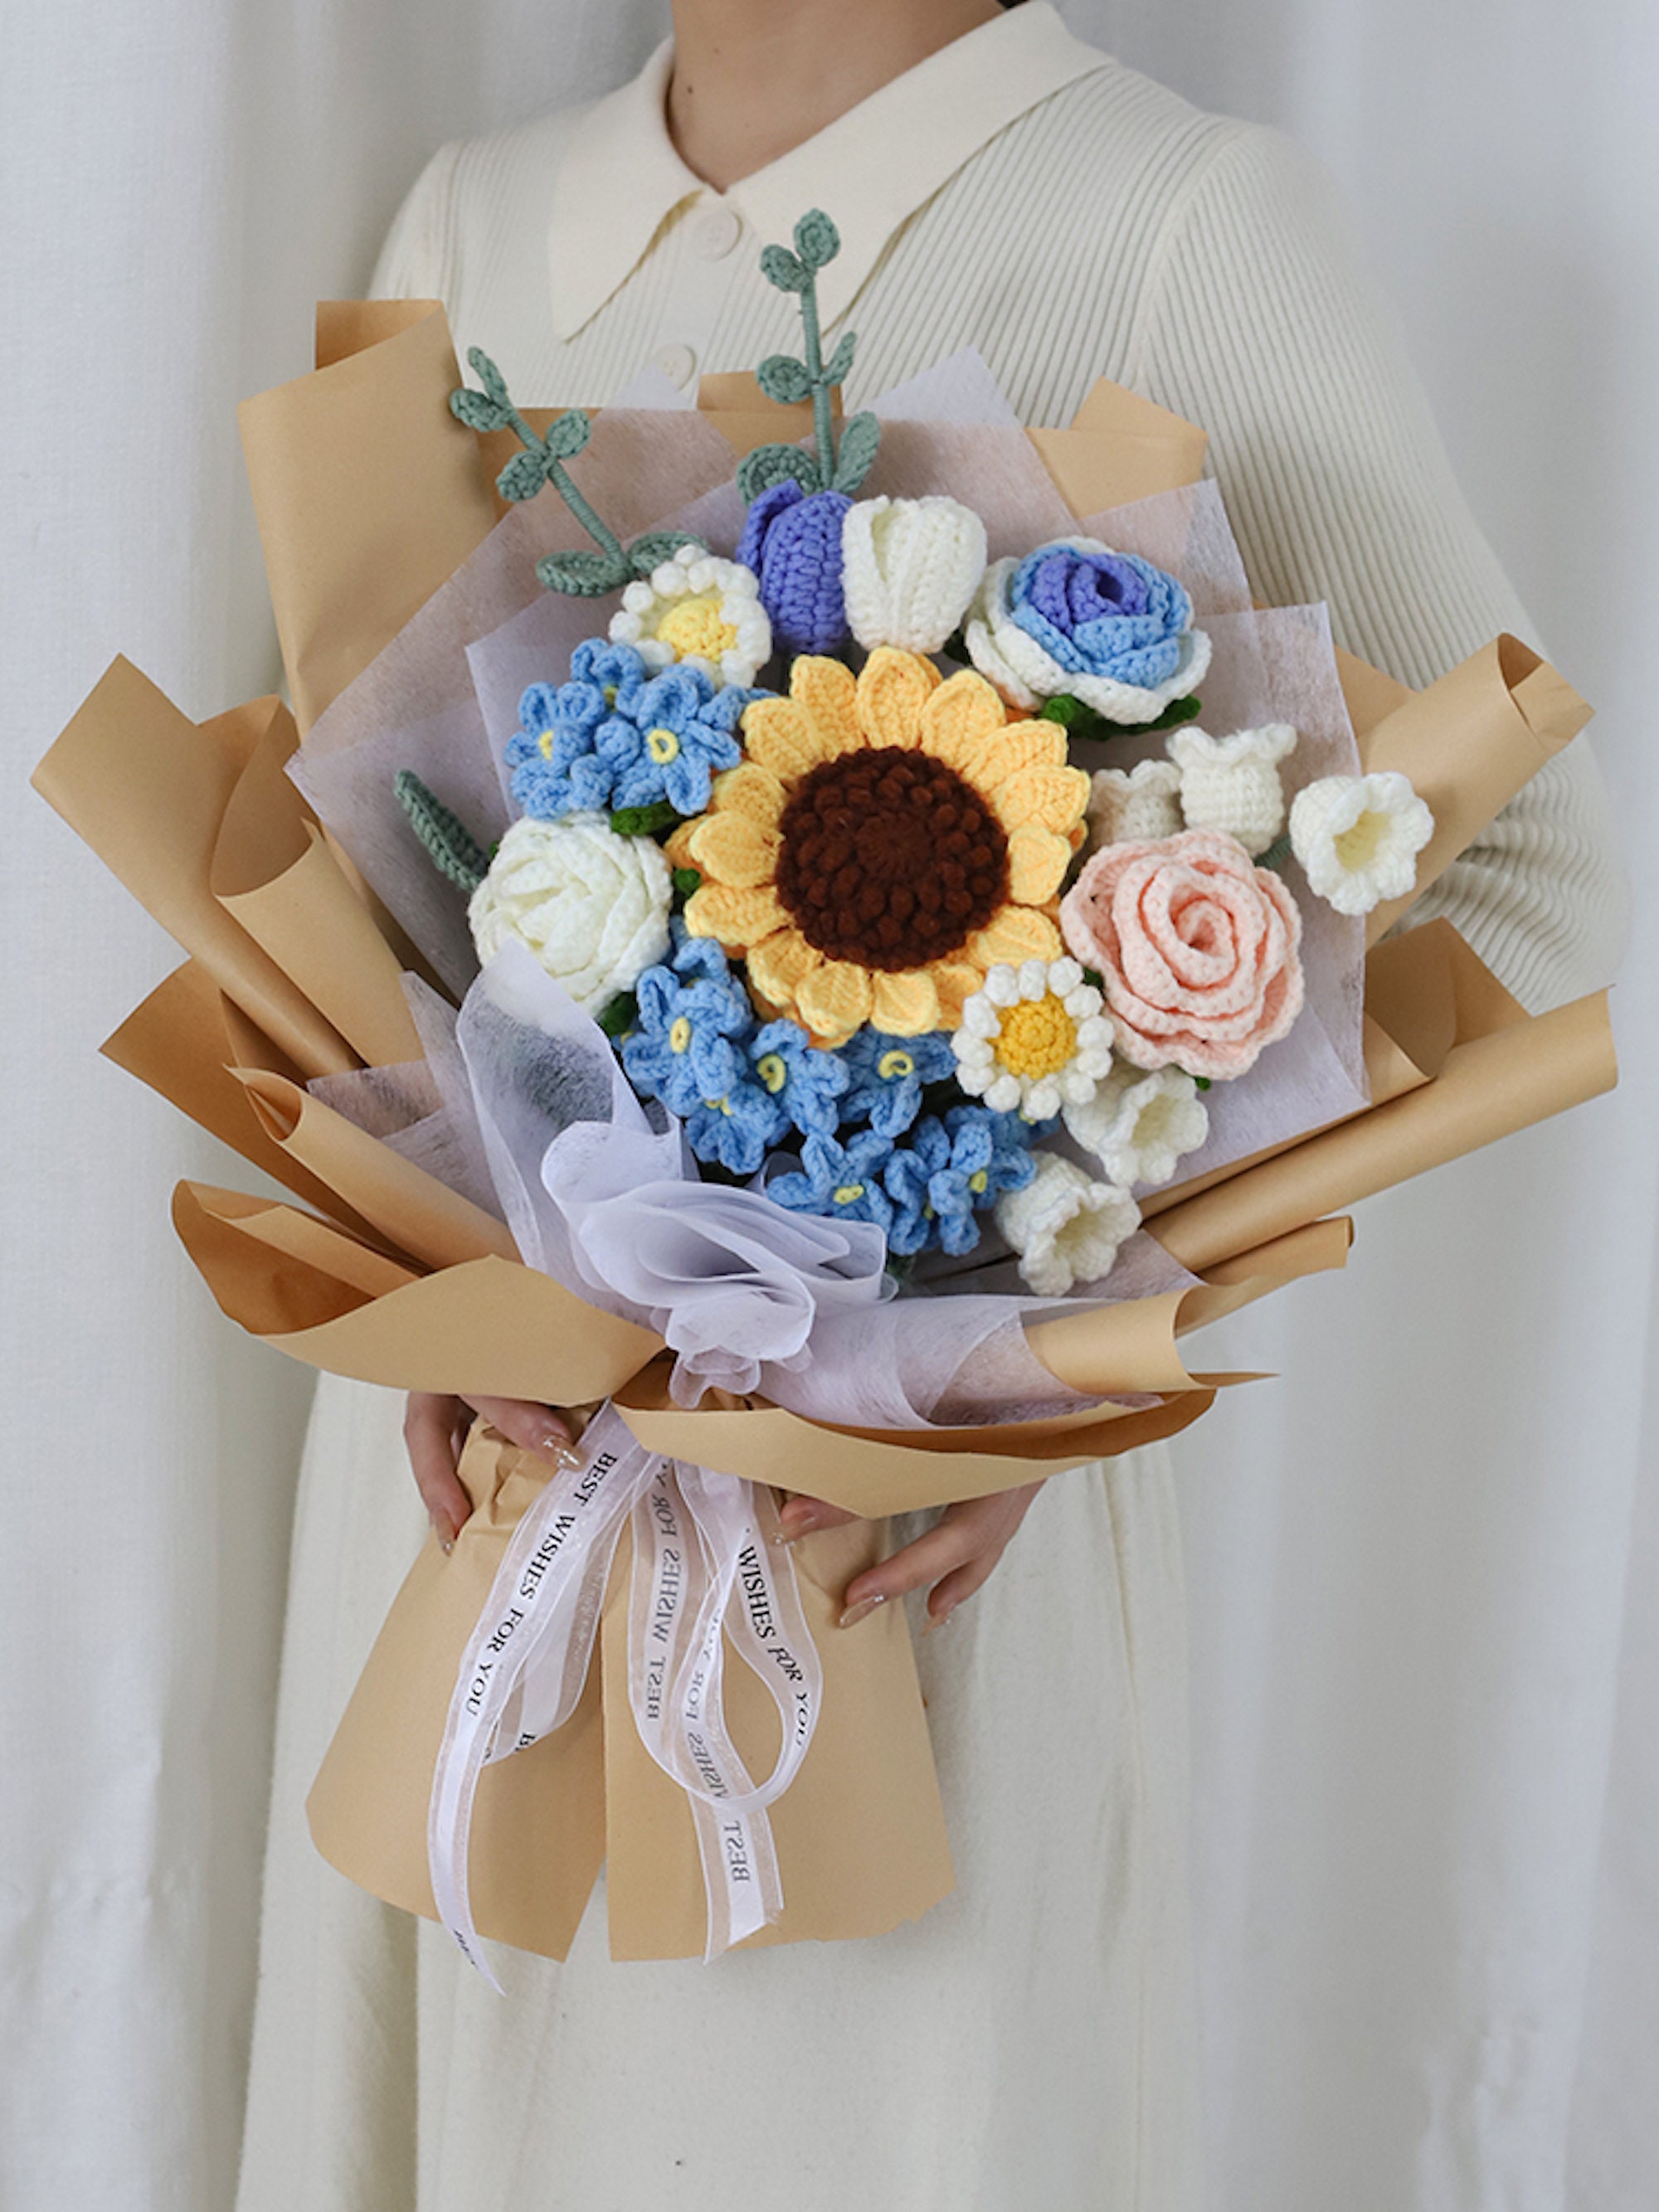 Creative Flowers Bouquet Hand-woven Flower Bouquet Finished Crochet Flower  with Portable Paper Bag Party Decoration Gift 꽃다발 ブーケ - AliExpress